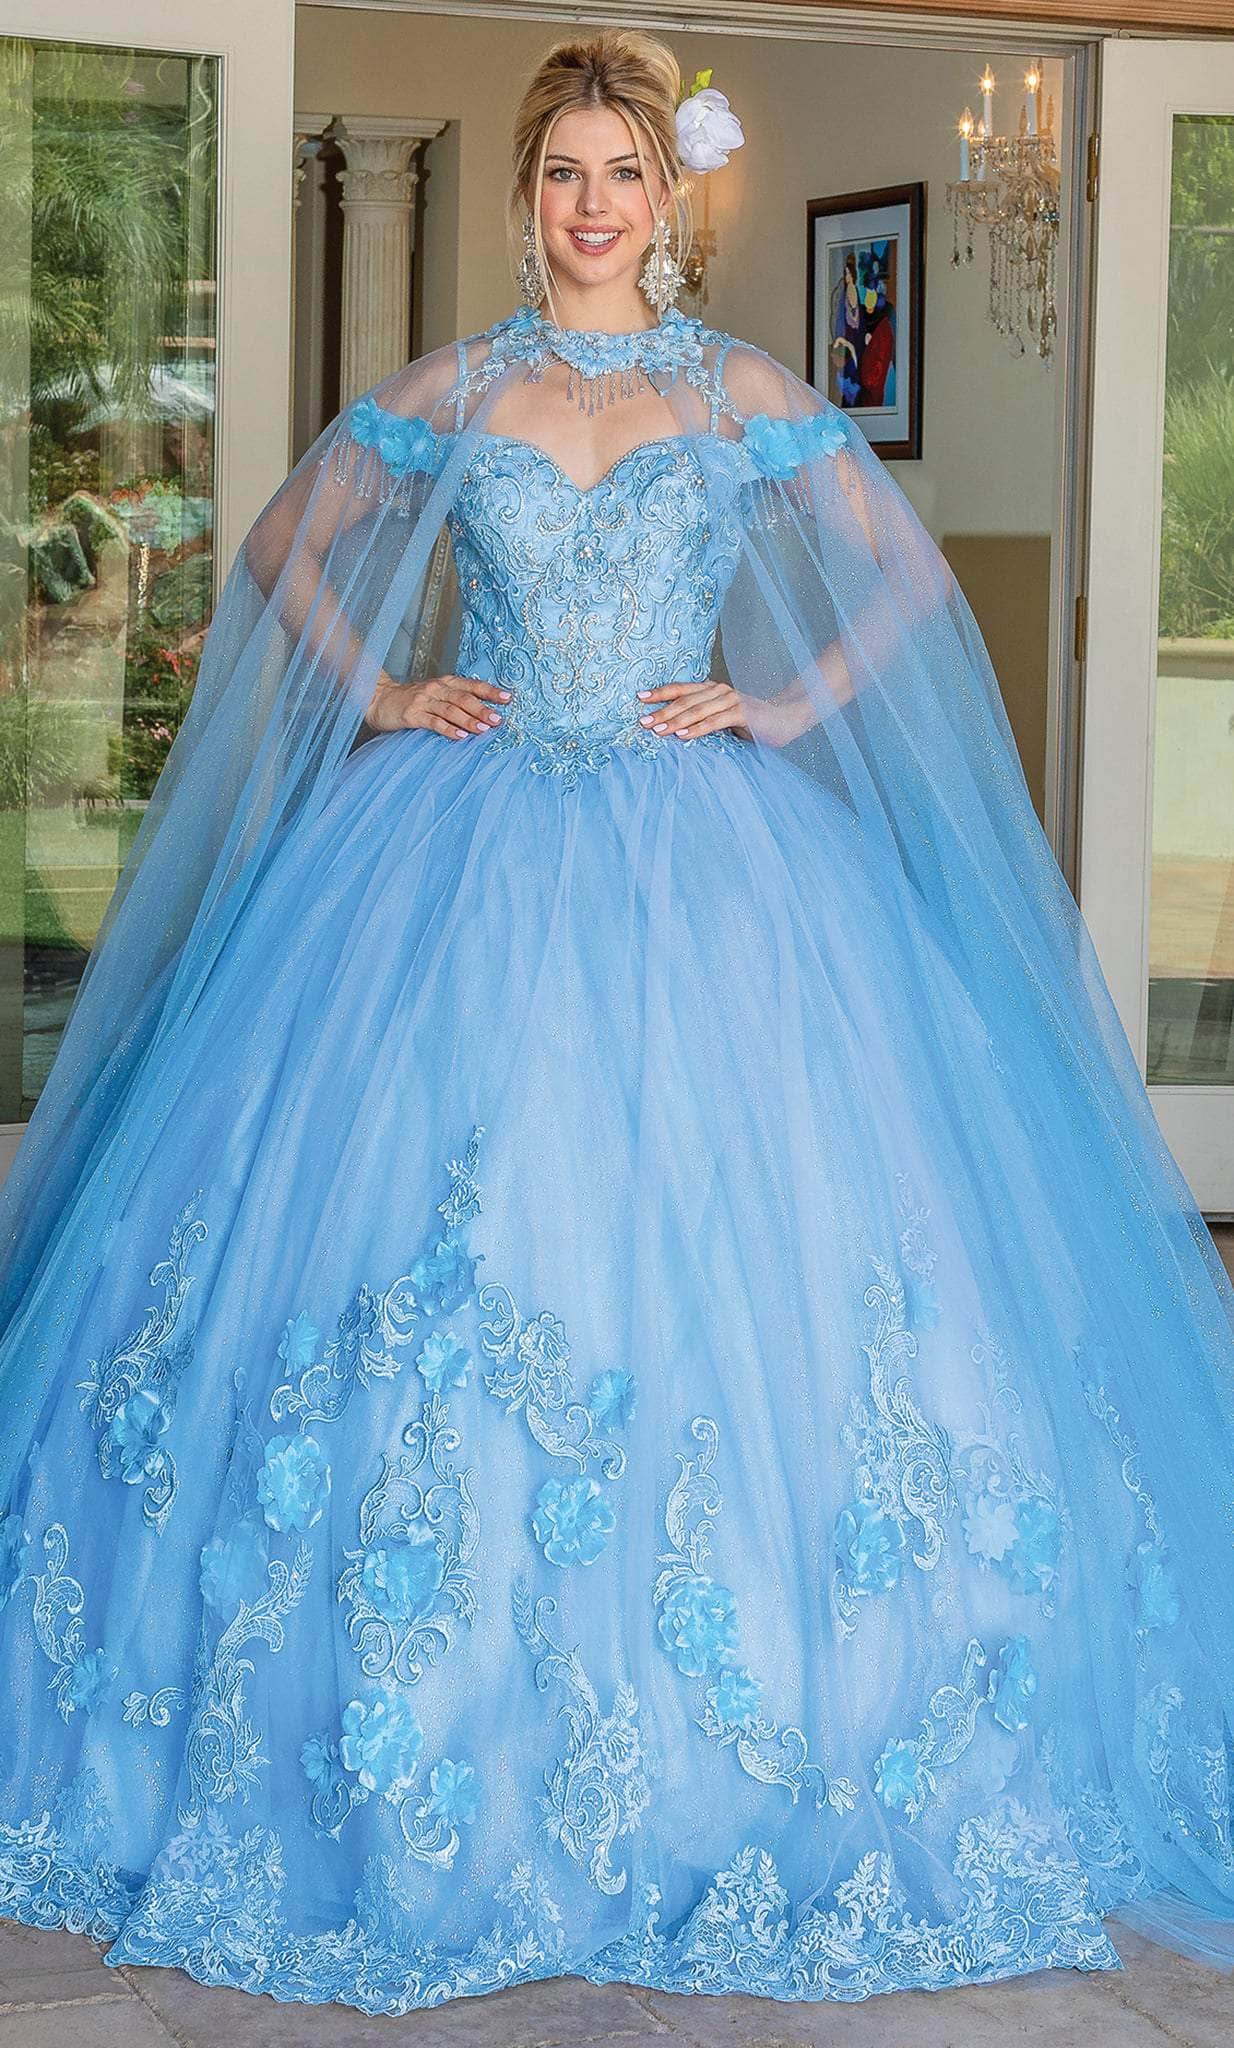 Dancing Queen 1706 - Bead Fringed Quinceanera Ballgown Ball Gowns XS / Bahama Blue